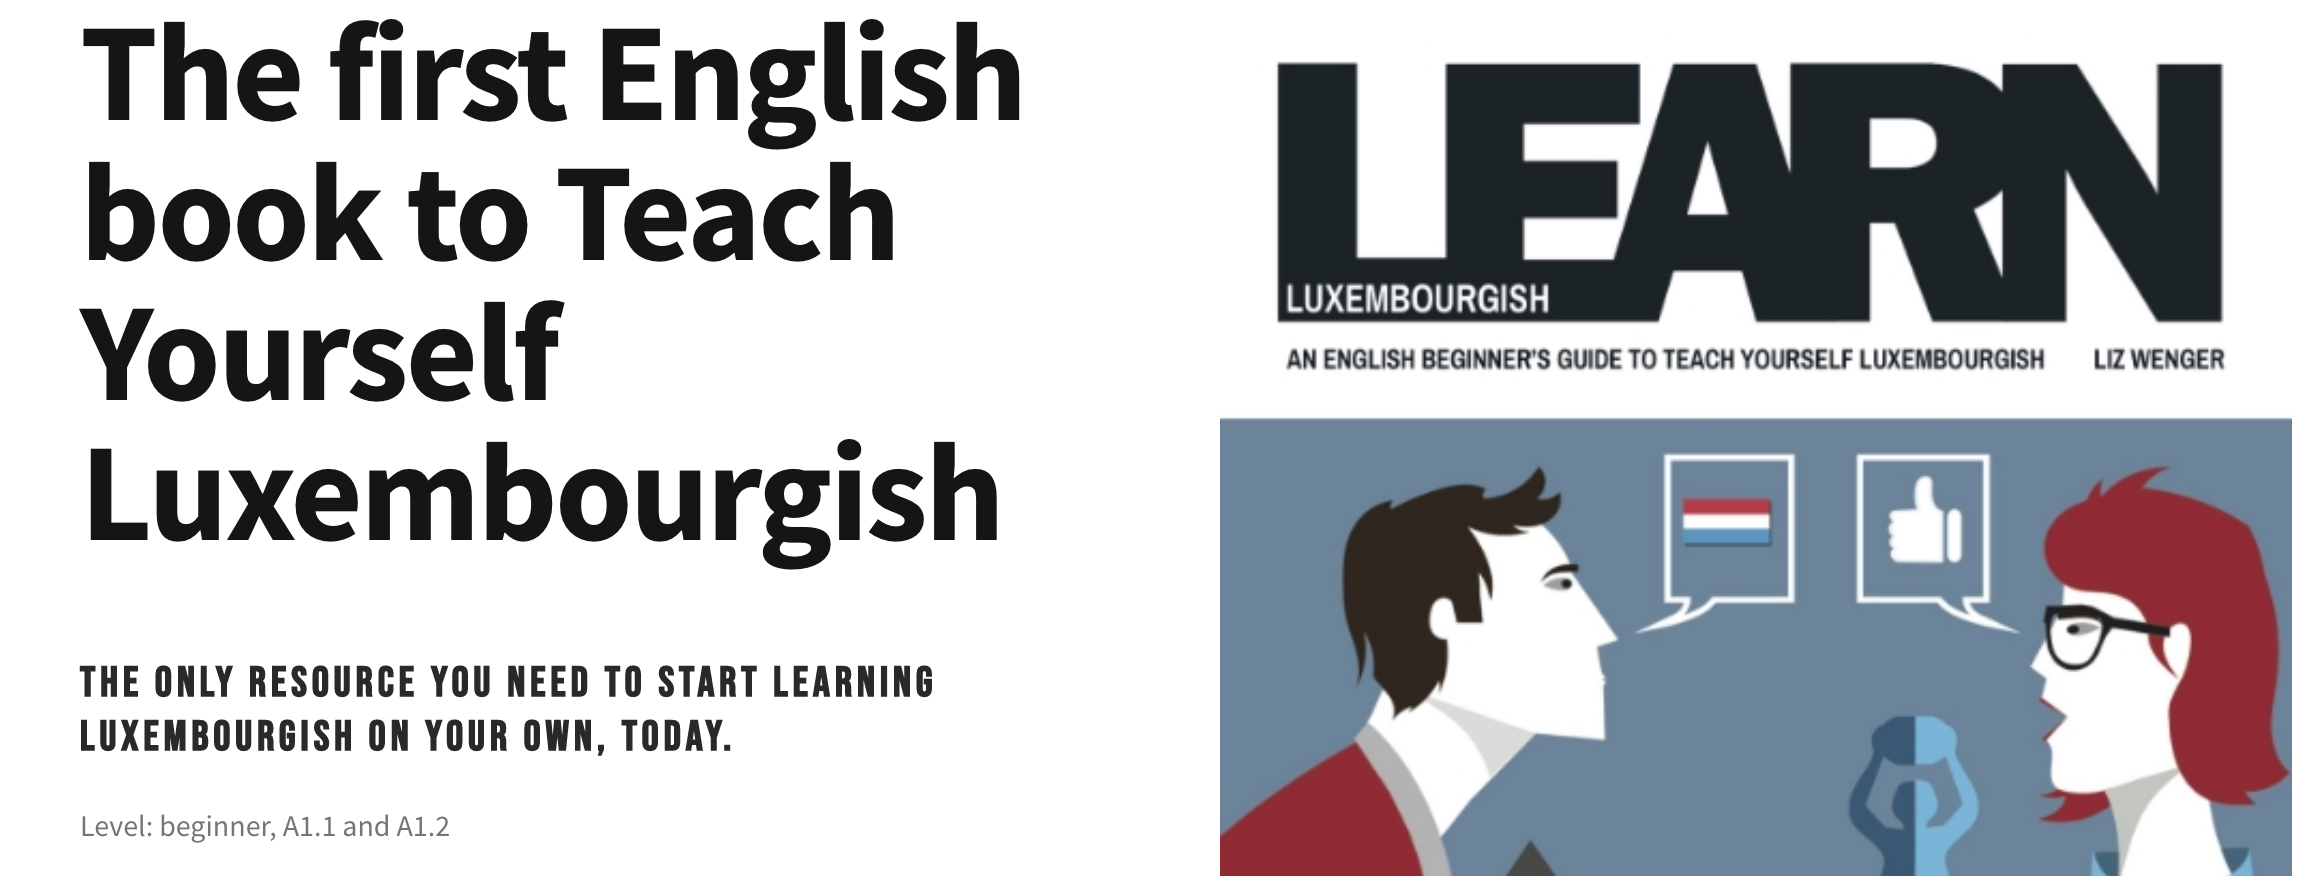 Learn Luxembourgish now